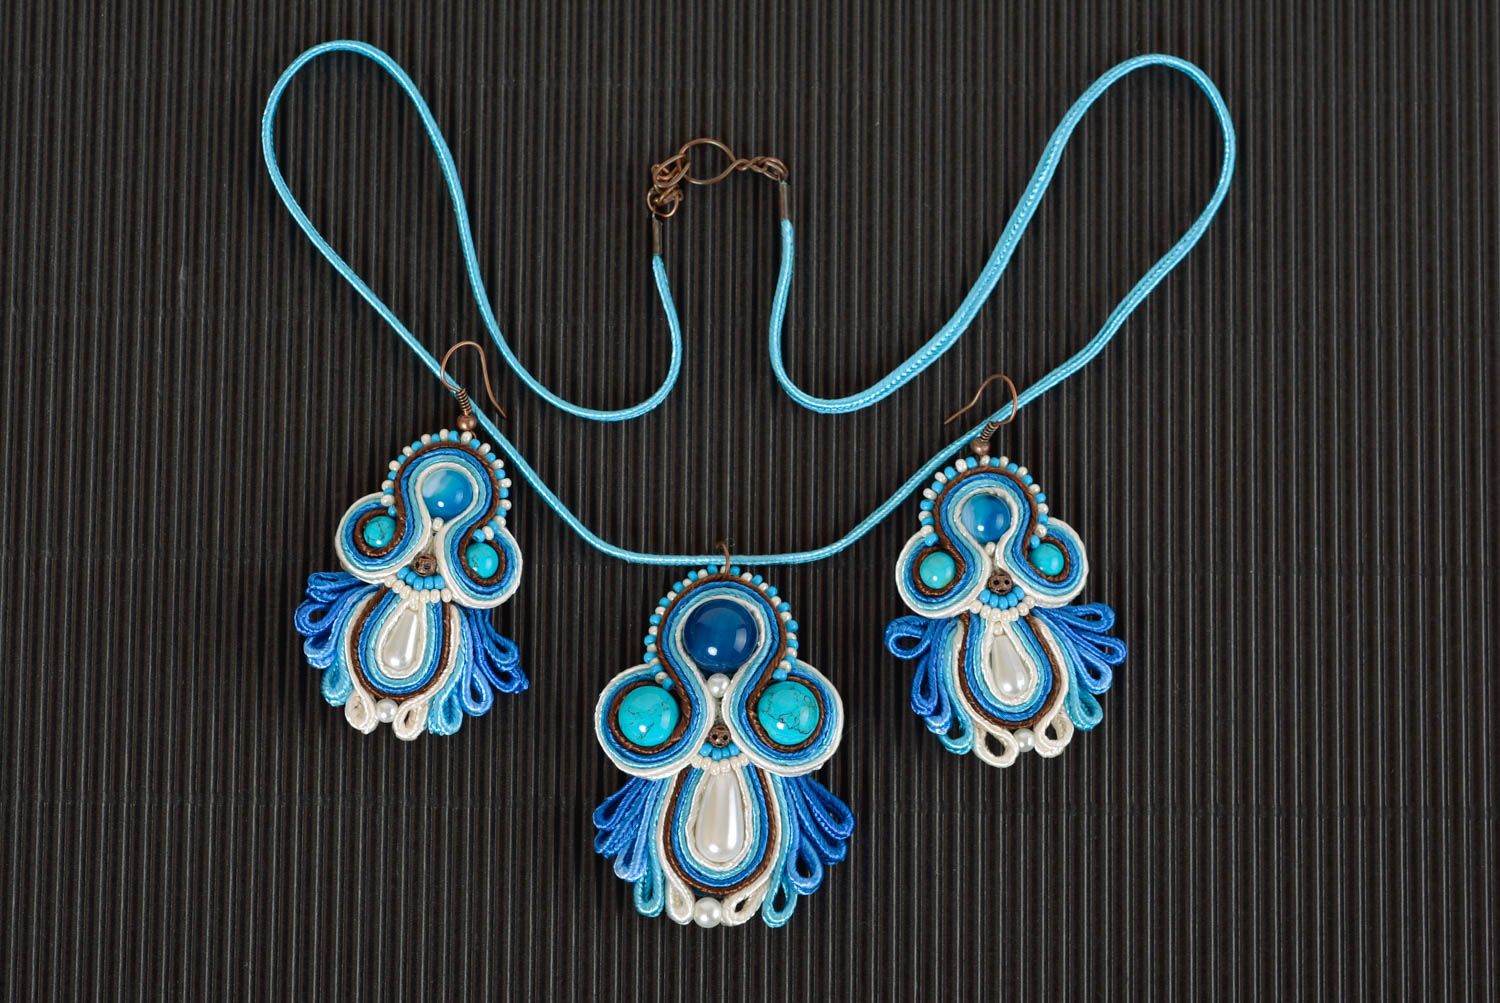 Handmade soutache jewelry soutache pendant and earrings accessories with stones photo 3